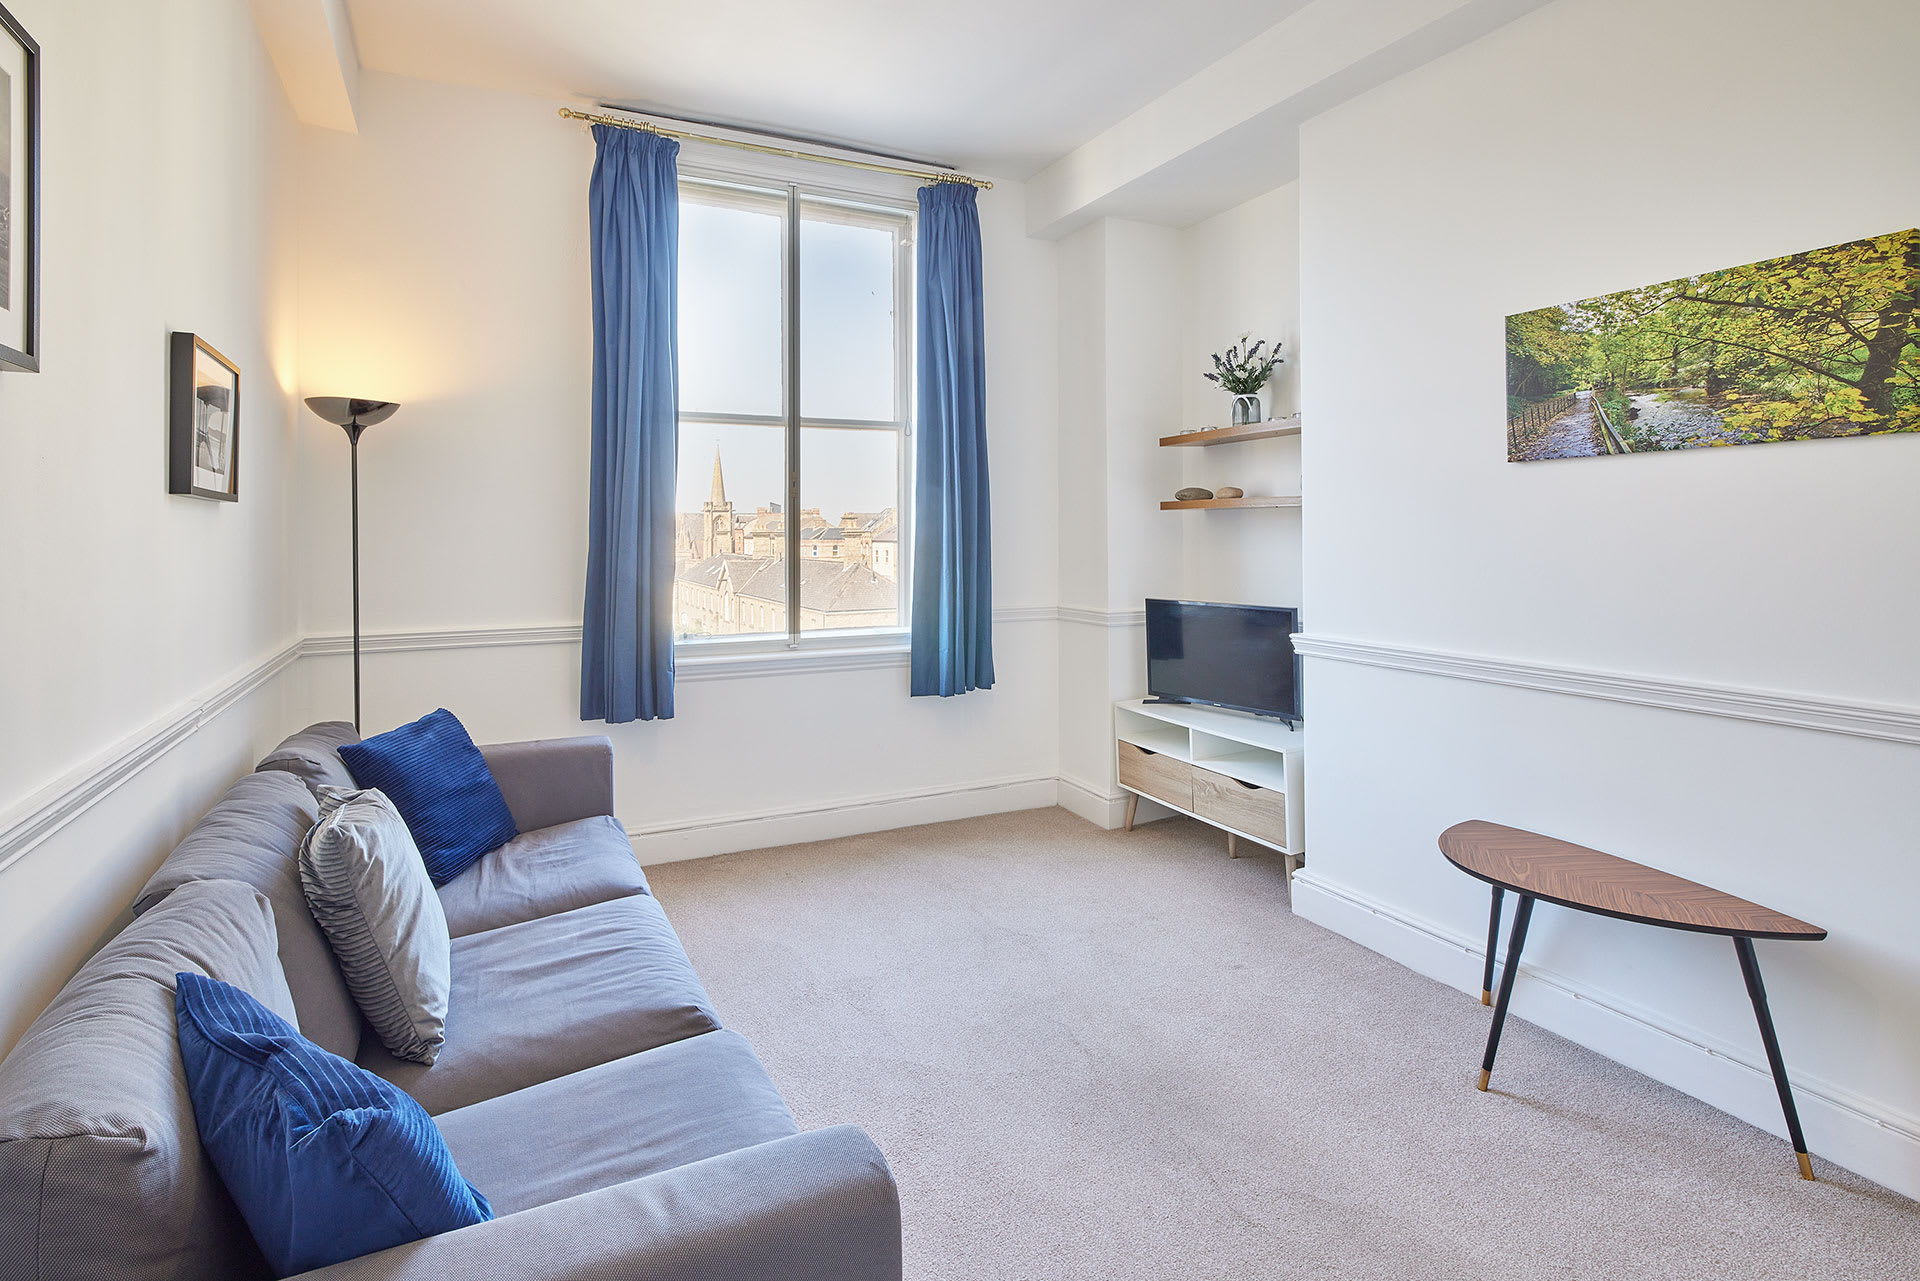 Apartment 19 @ The Zetland, Saltburn-by-the-Sea - Host & Stay